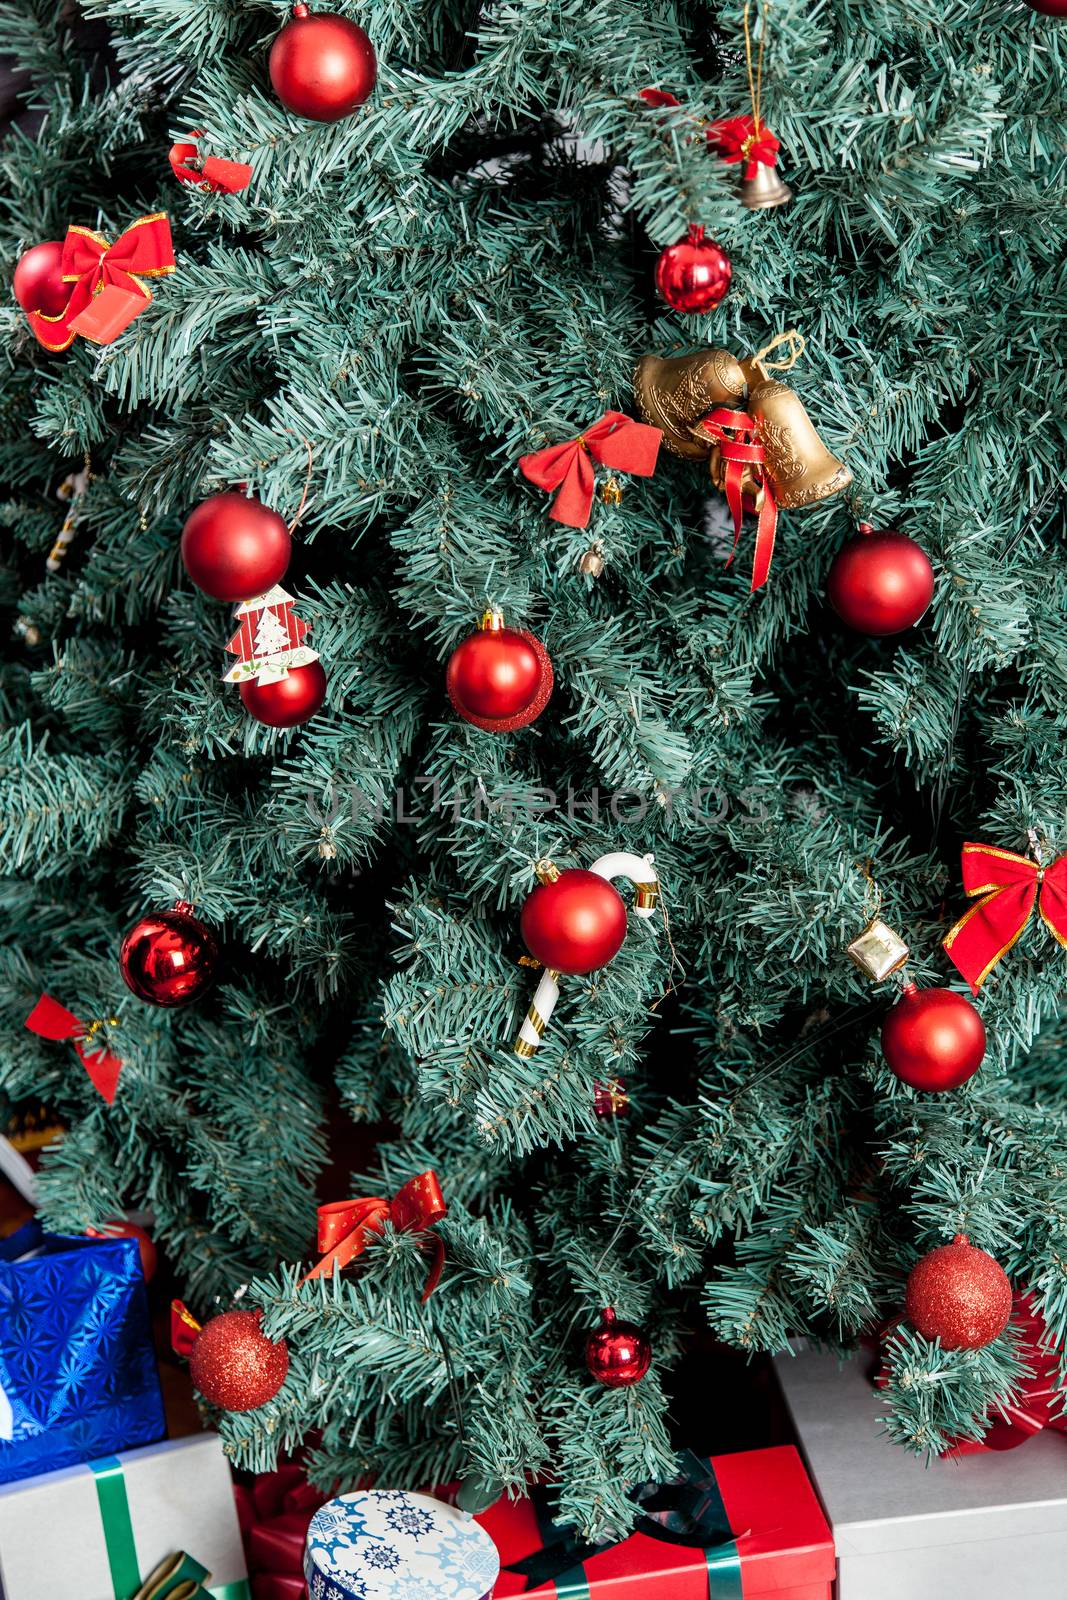 balls, beautiful, bun, celebration, christmas, colorful, decorate, decorated, decoration, festive, gifts, gold, golden, green, holiday, lights, model, new, ornament, pine, present, presents, property, red, releases, ribbon, santa, shiny, star, studio, tree, vertical, white, winter, xmas, year, gift, box, giftbox,